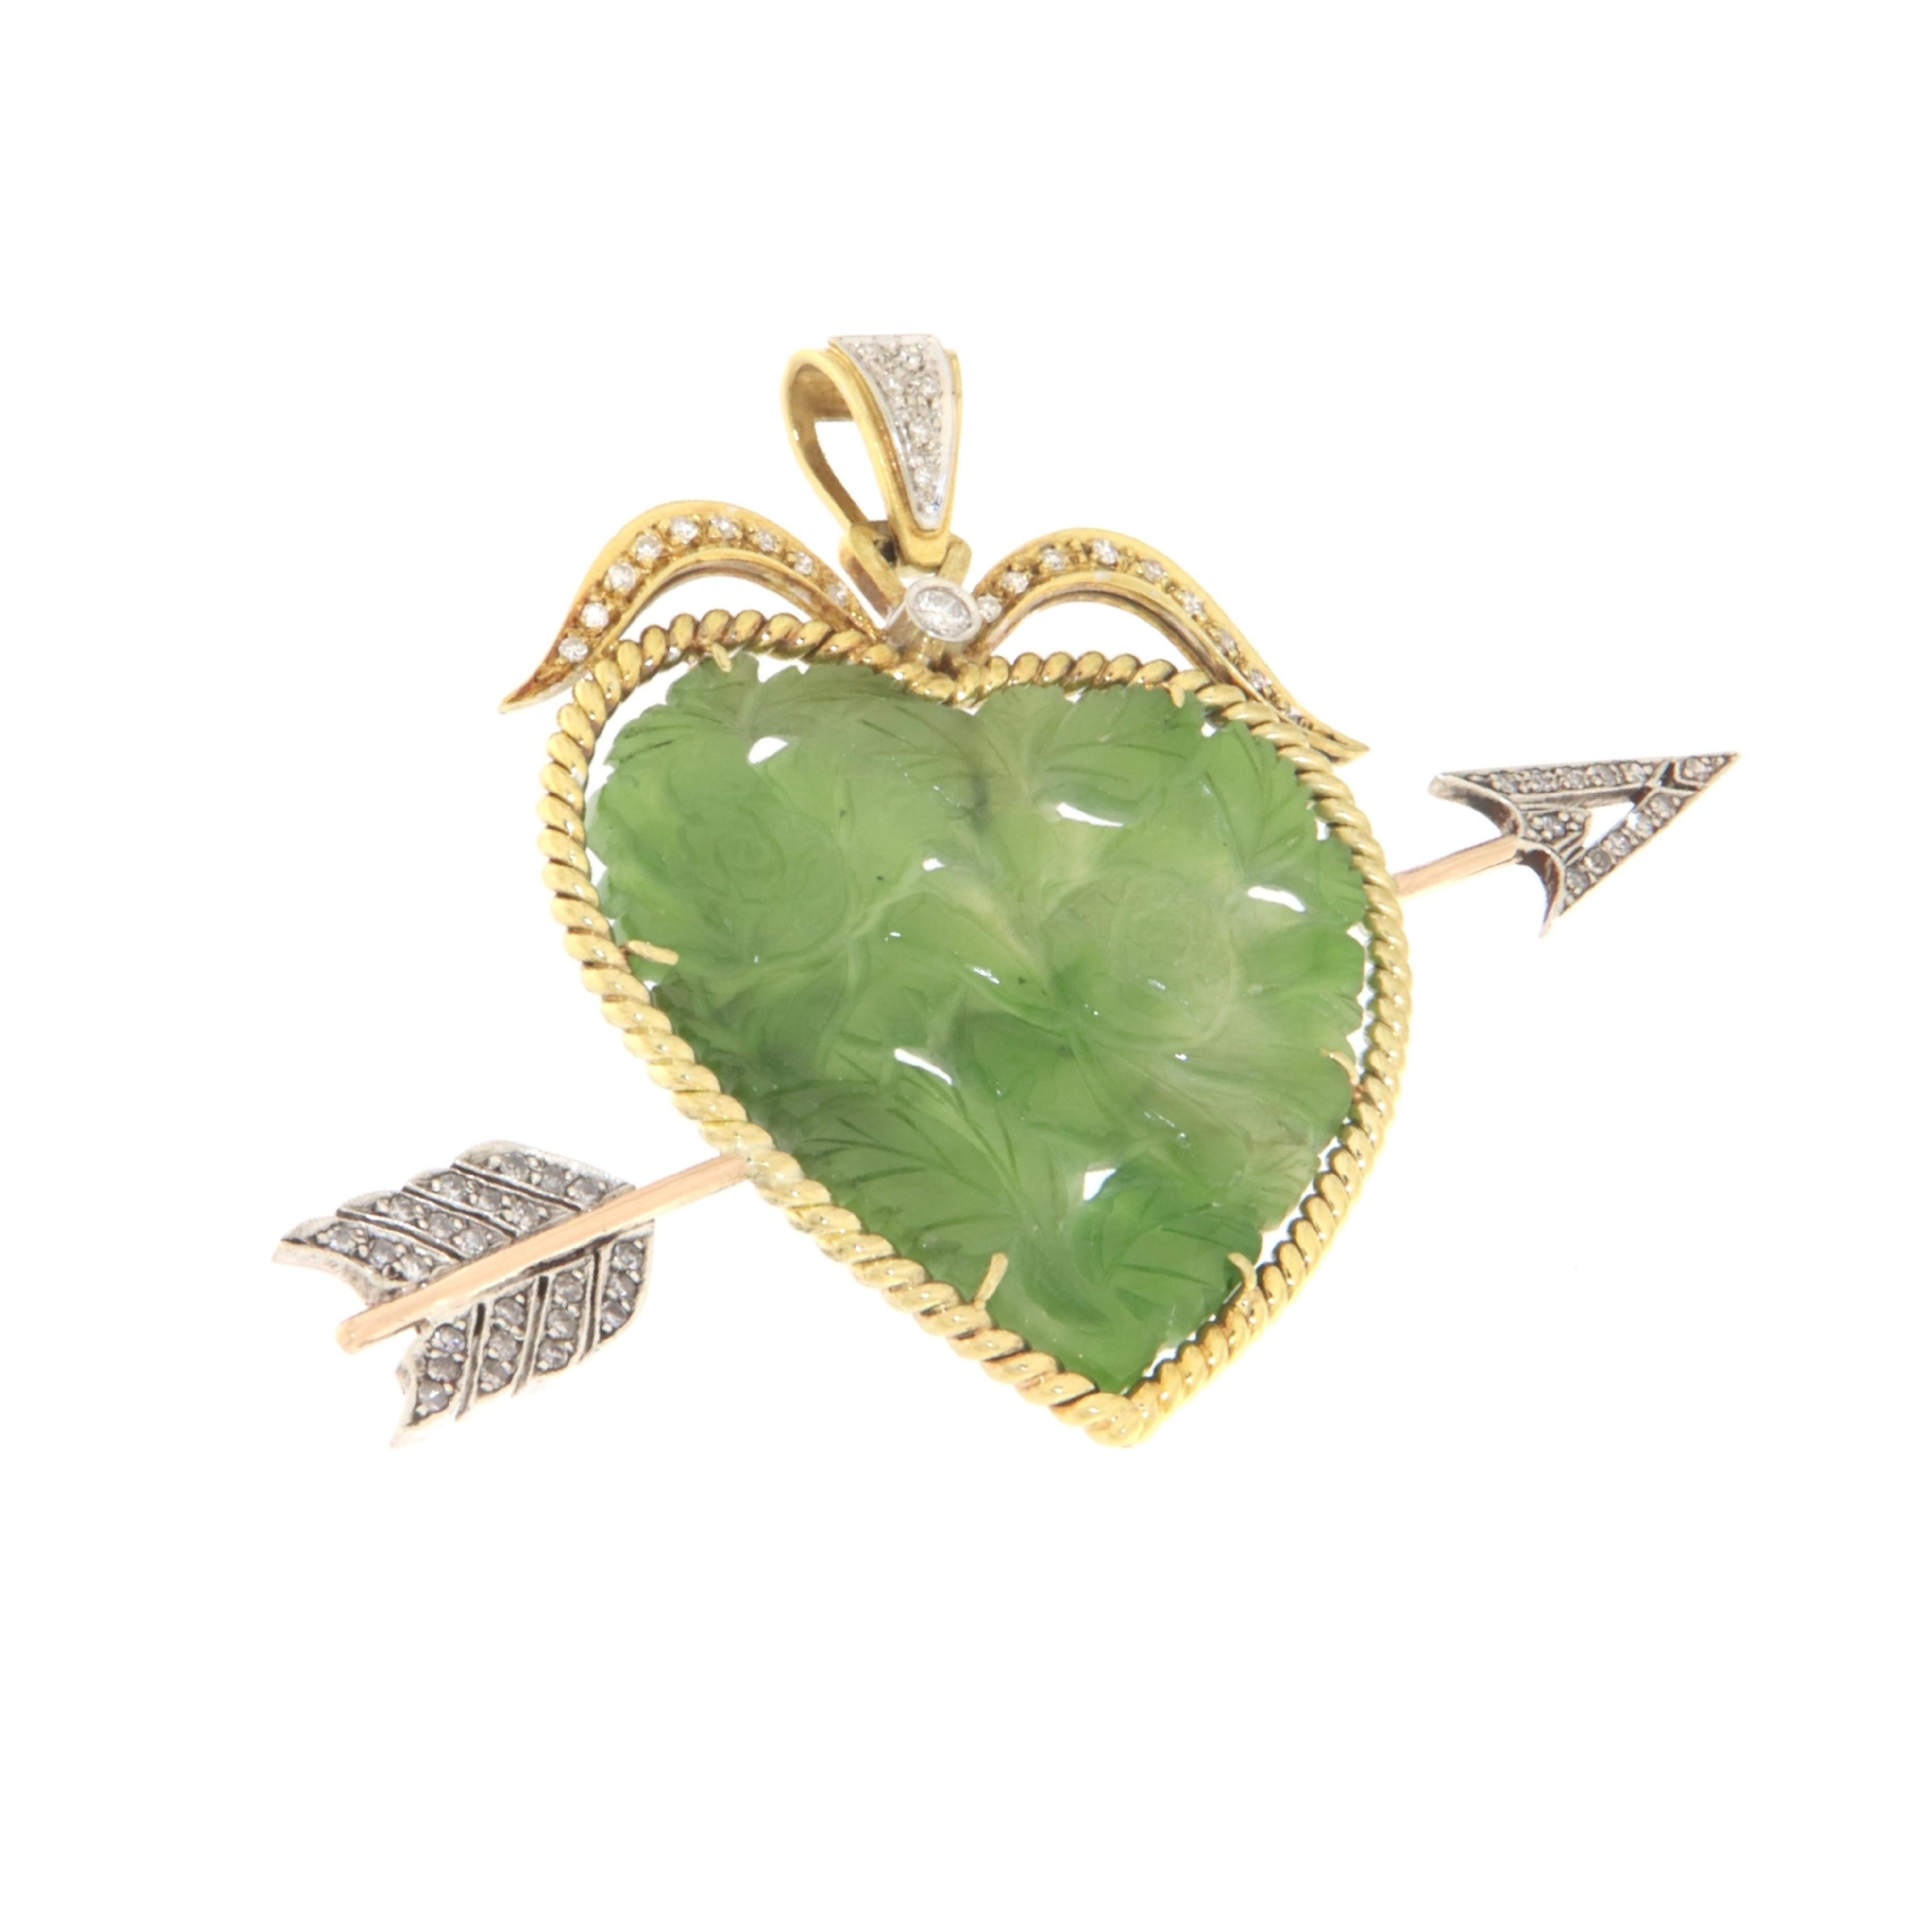 This heart-shaped jade pendant is a true gem that blends traditional elegance with a contemporary touch. Crafted with care and precision, the pendant is set in 18-karat yellow and white gold, making it as precious as it is spectacular.

The jade,